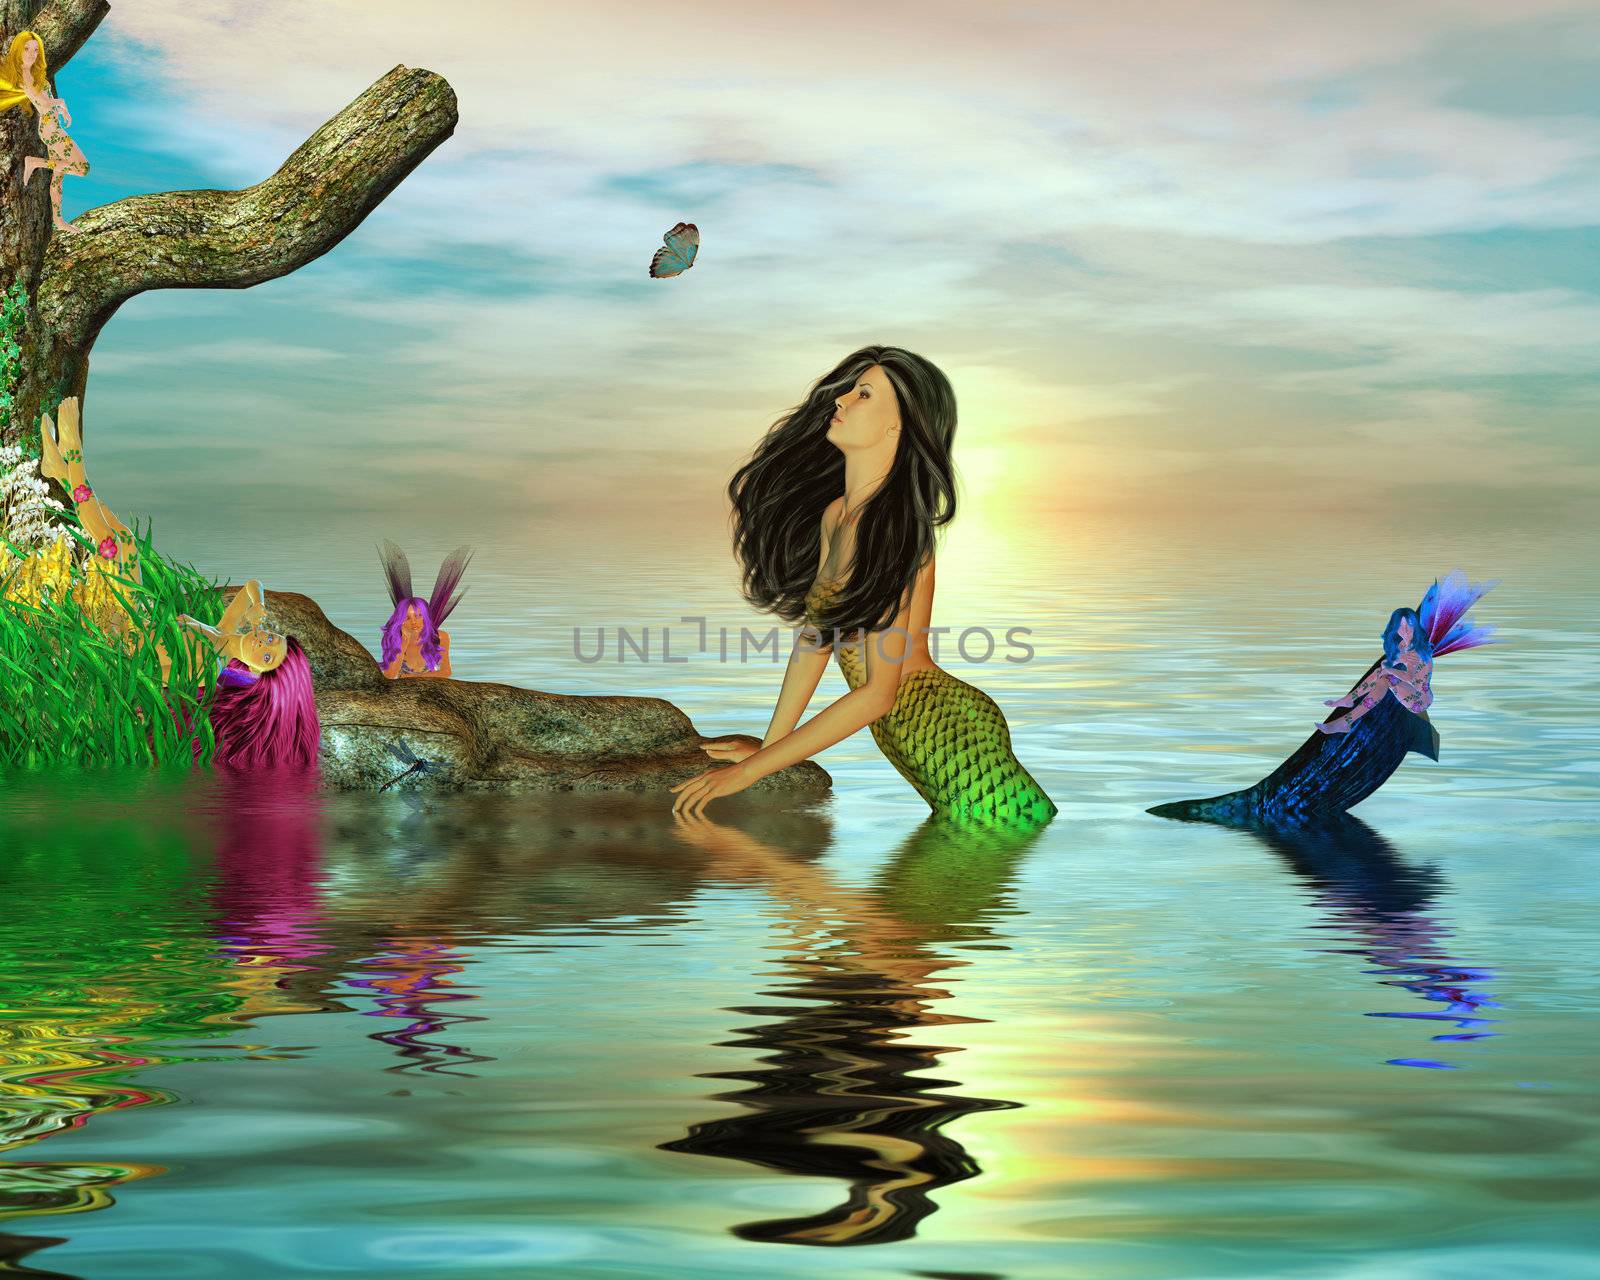 Fairys And Mermaid by kathygold